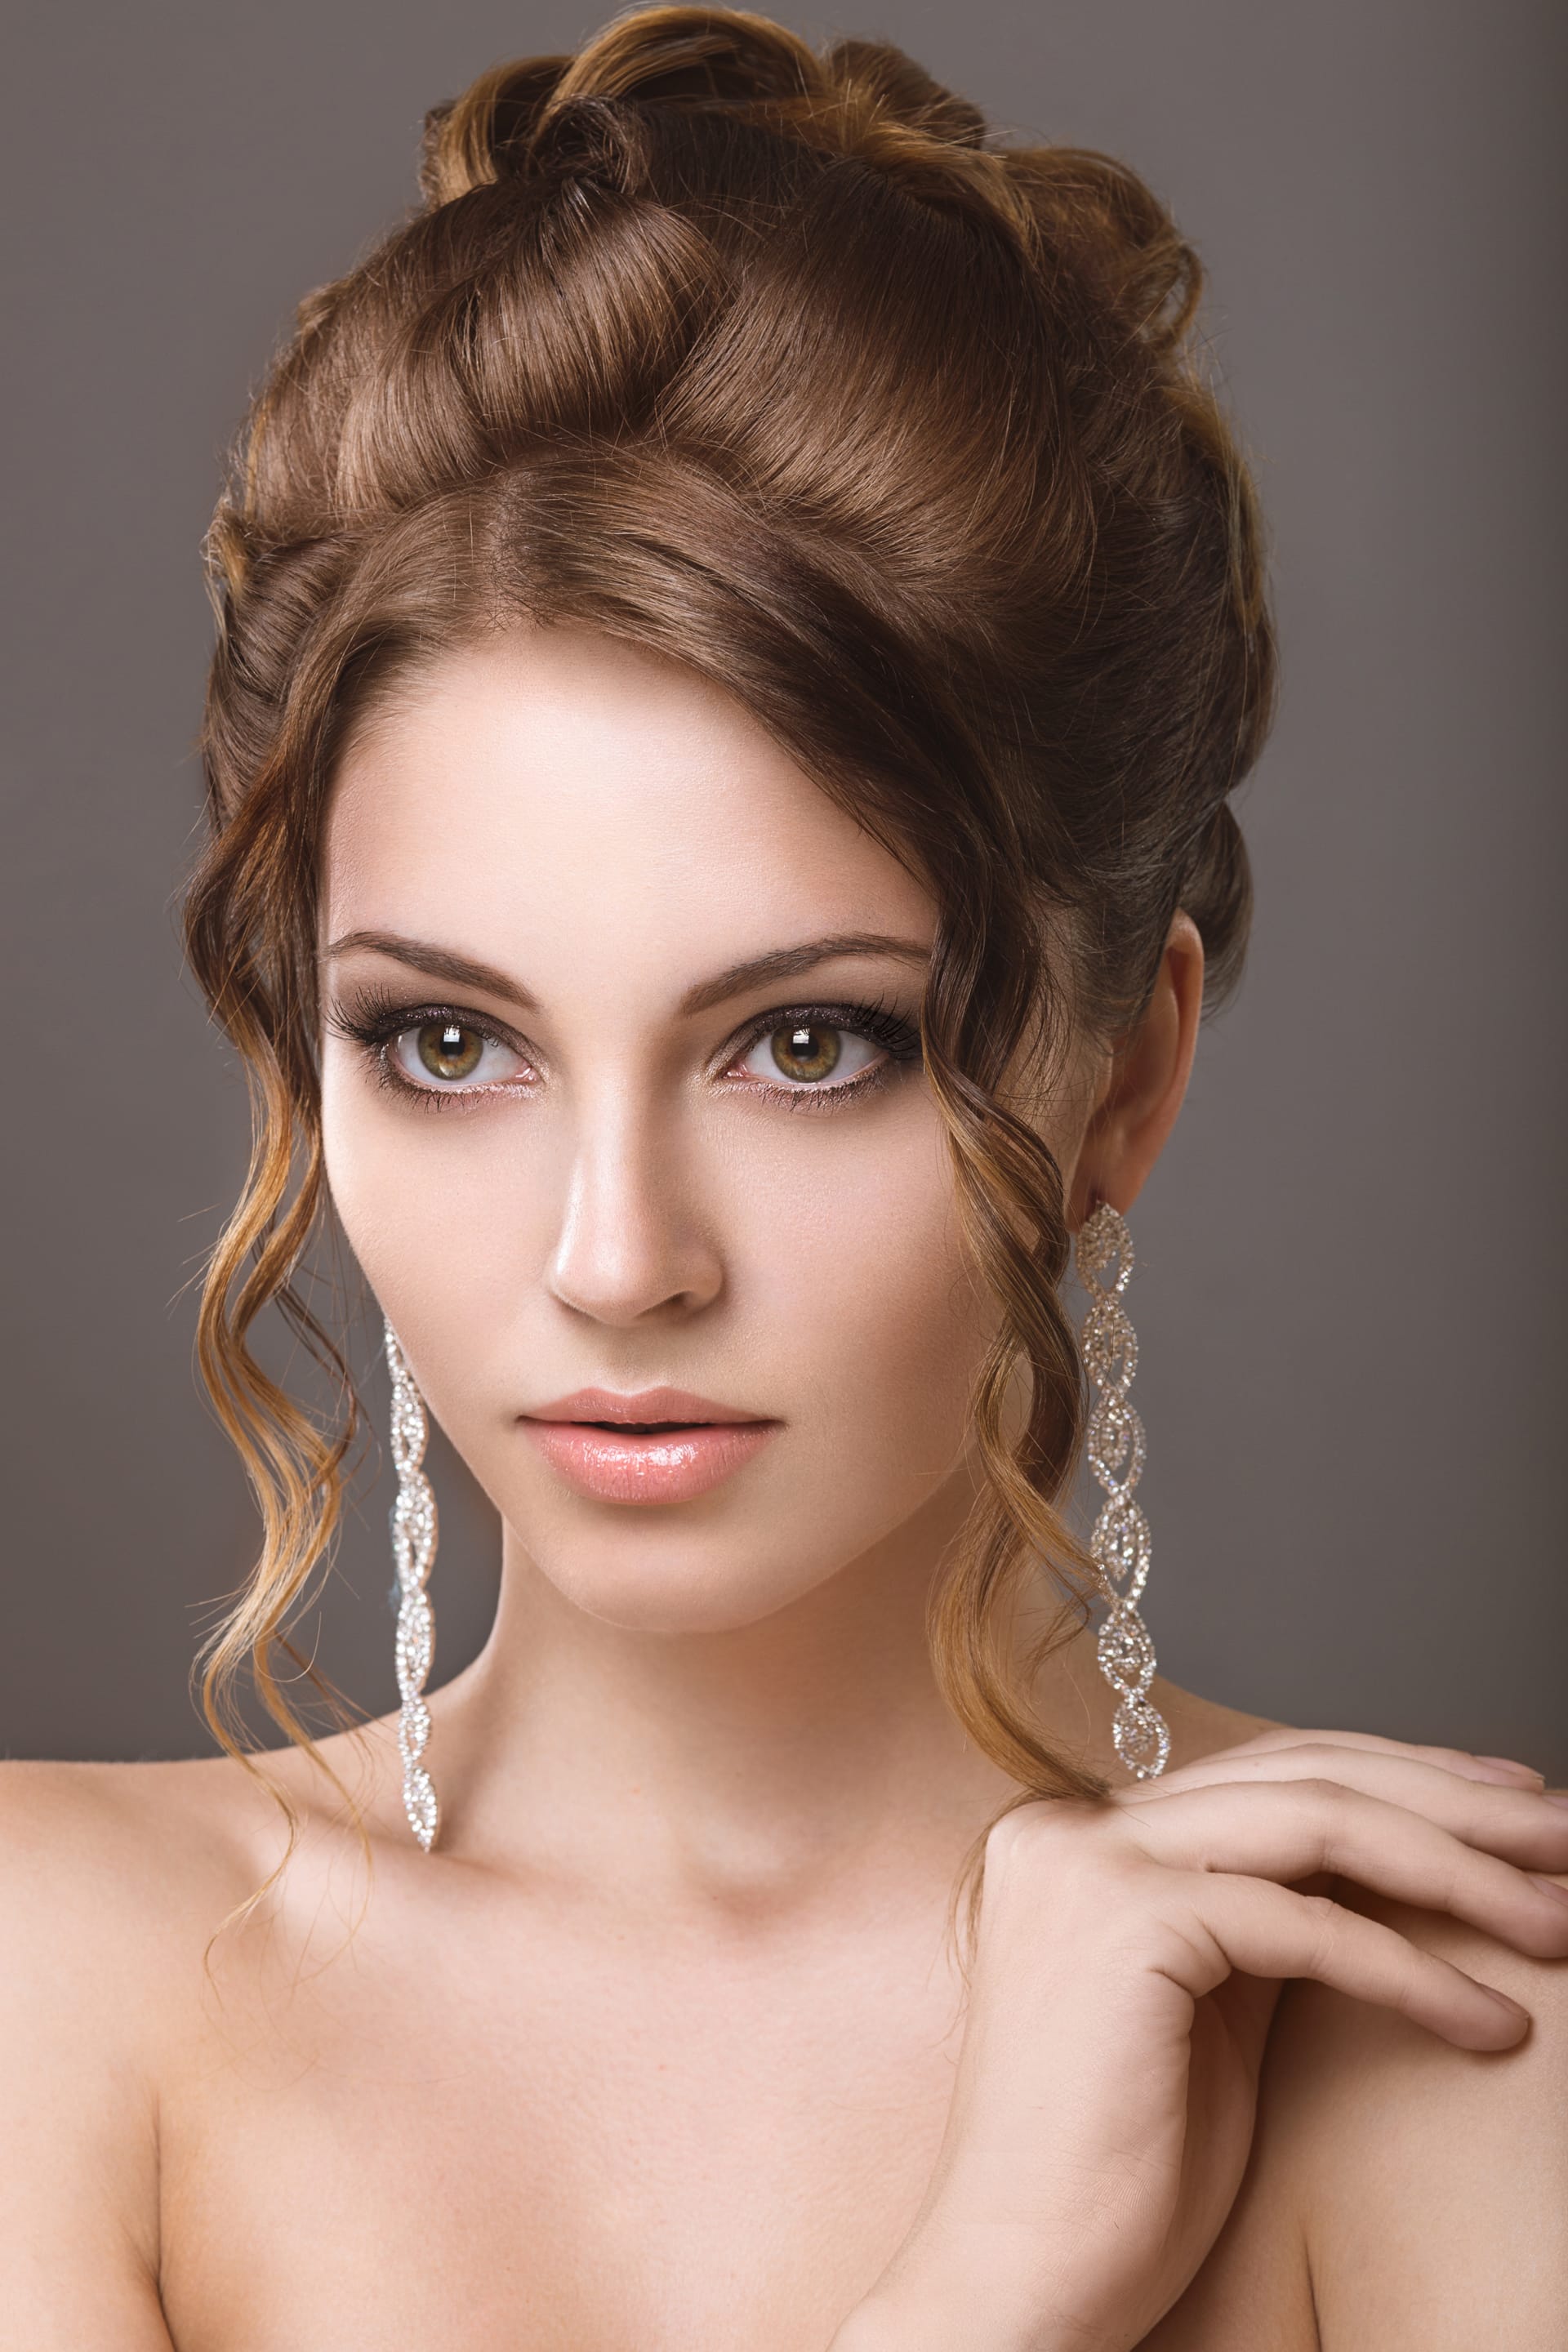 Portrait young woman with elegant hairstyle picture aesthetic profile pics